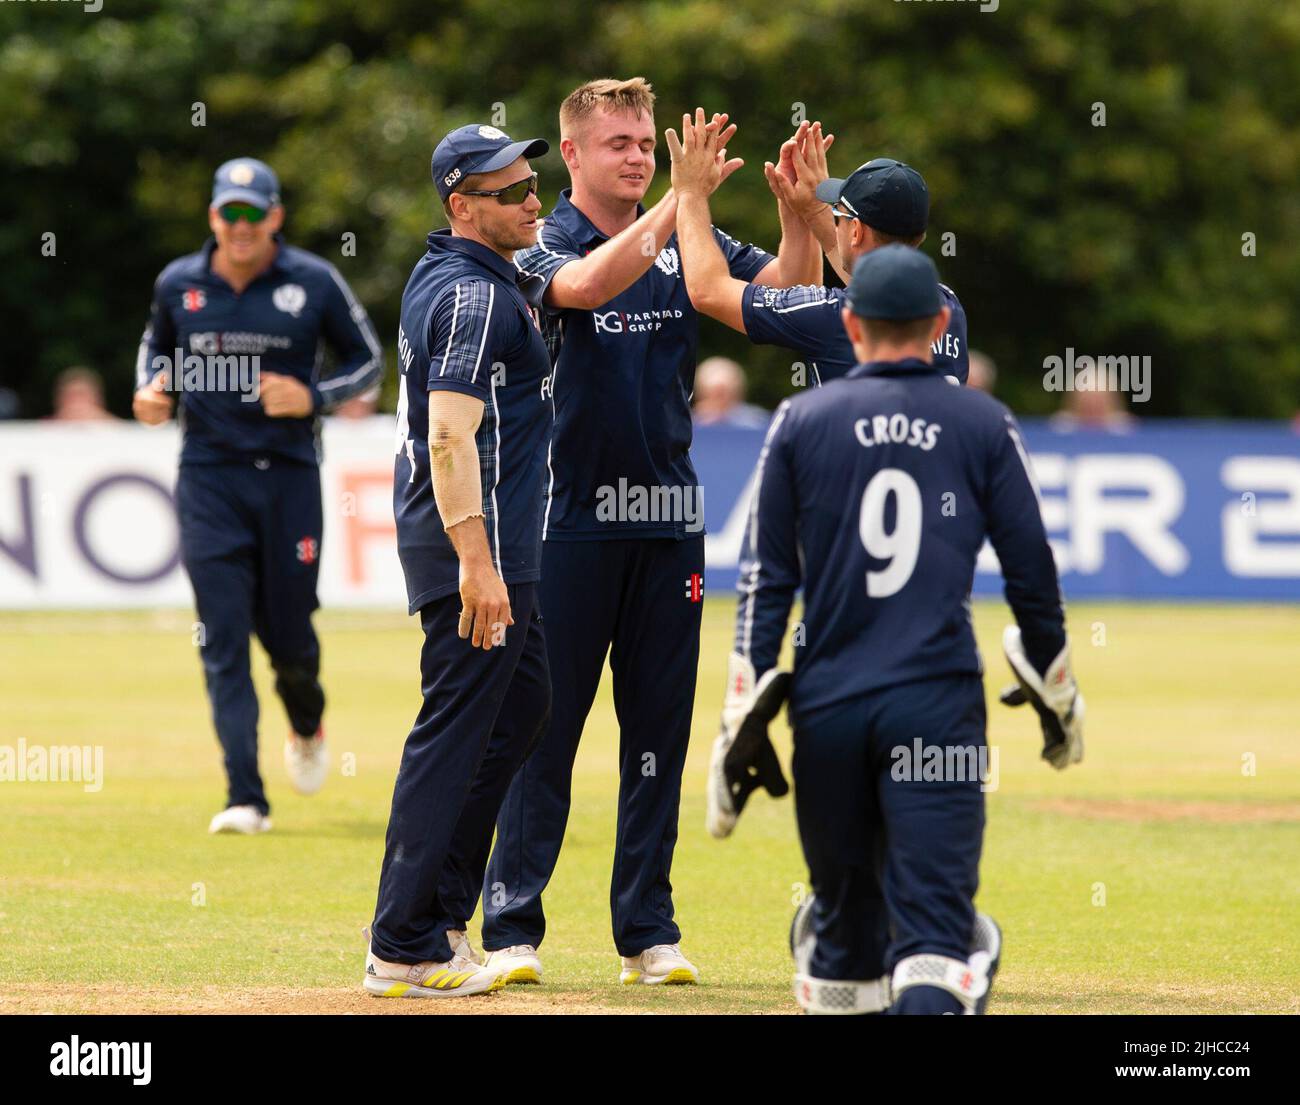 ICC Men's Cricket World Cup League 2 - Scotland v, Nepal. 17th July, 2022. Scotland take on Nepal for the second time in the ICC Div 2 Men's Cricket World Cup League 2 at Titwood, Glasgow. Pic shows: Scotland's Chris McBride is mobbed by teammates after taking his first international wicket by dismissing NepalÕs Rohit Paudel for 10 runs Credit: Ian Jacobs/Alamy Live News Stock Photo